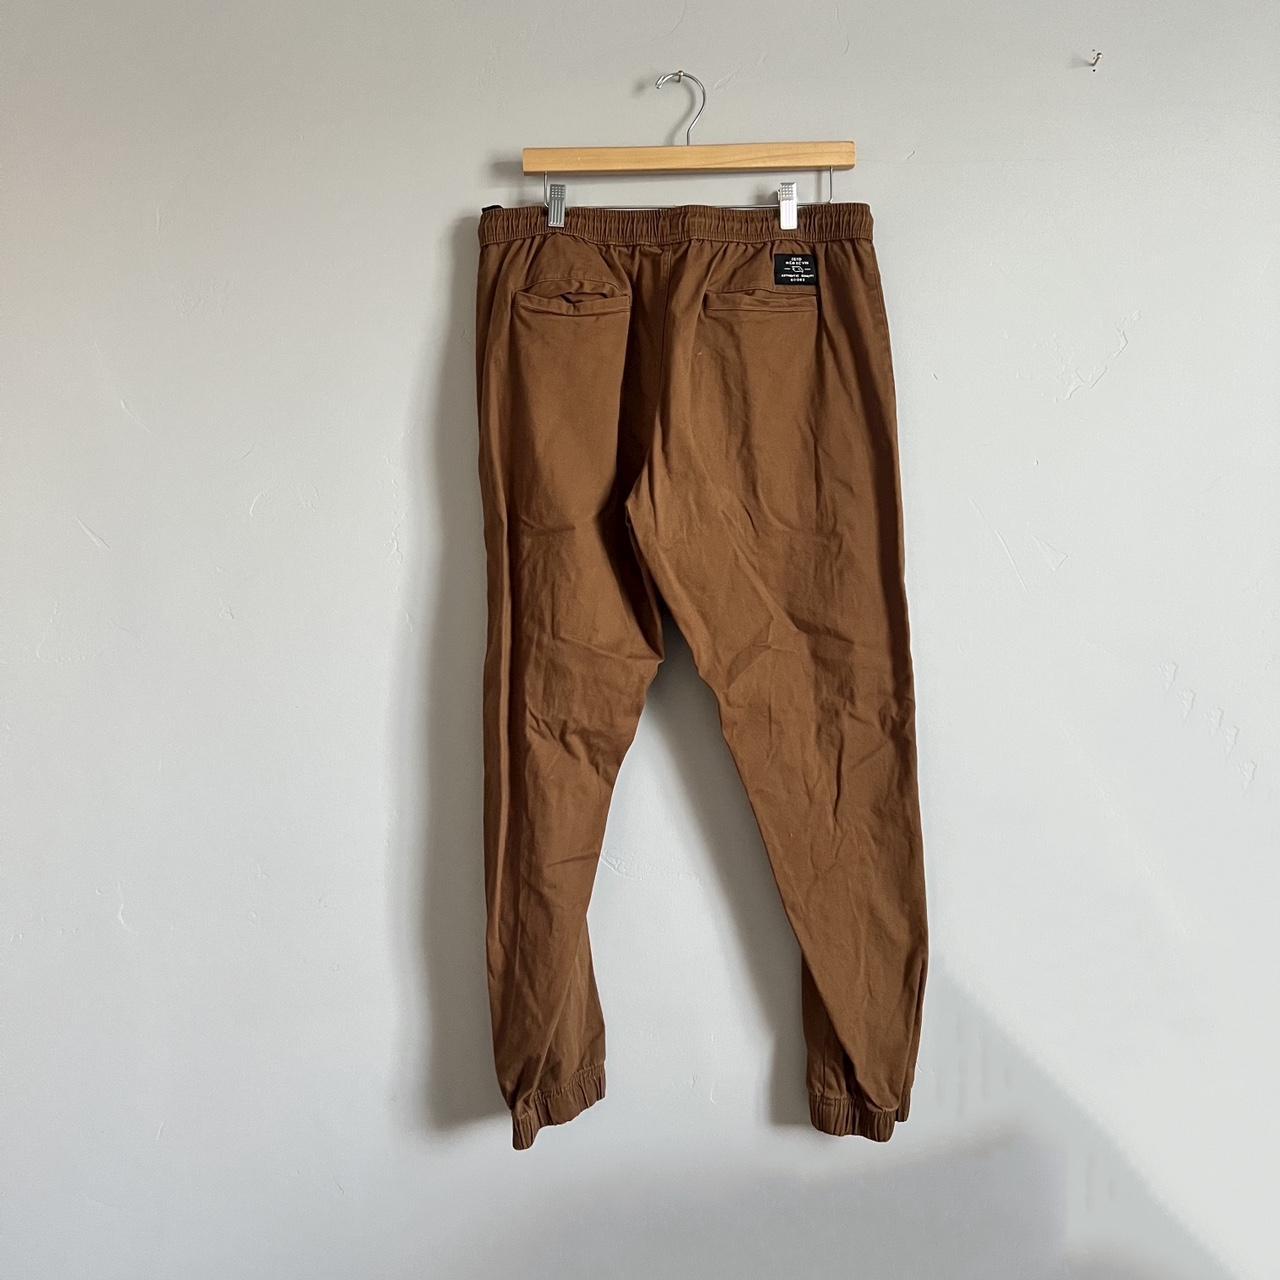 Hawke & Co. Men's Brown and Khaki Trousers (2)